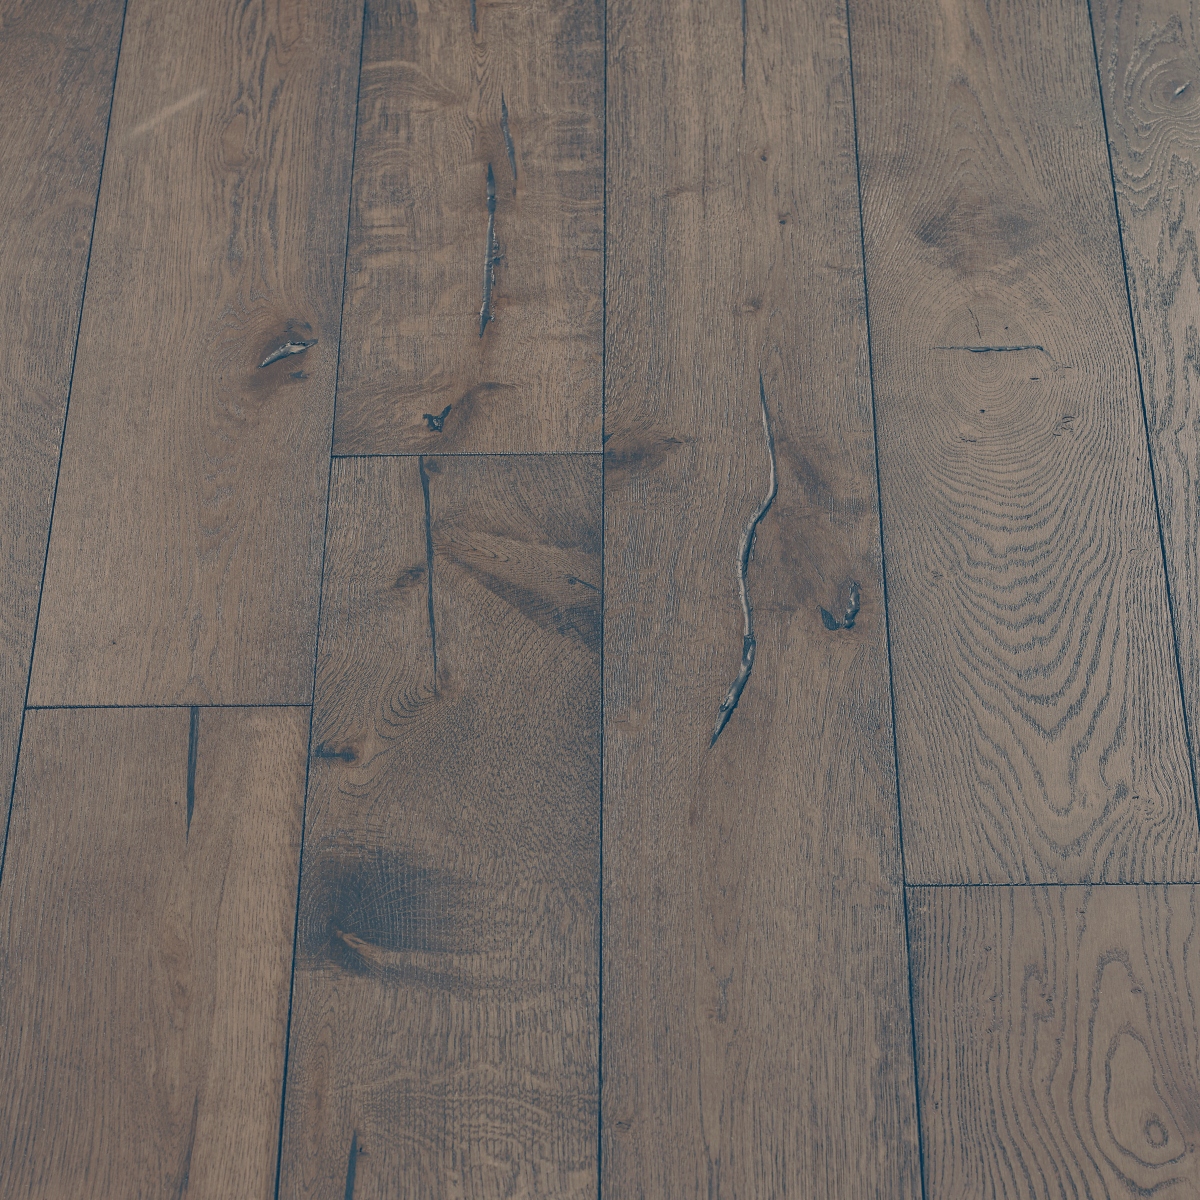 Boulder Distressed Wood Flooring: A photograph showcasing distressed boulder wood flooring with rugged textures and earthy brown tones, perfect for rustic or industrial interior designs.